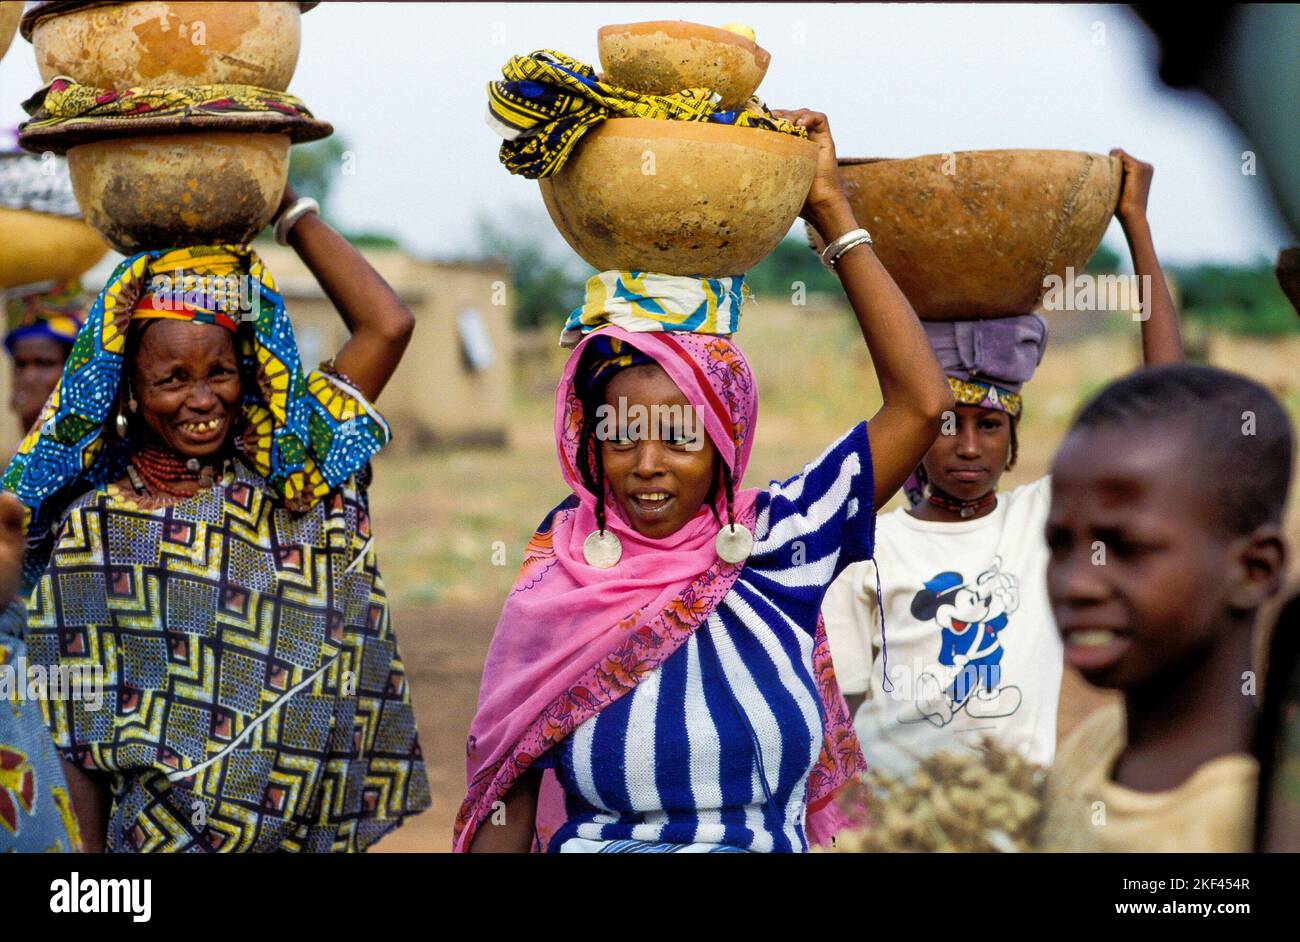 Burkina Faso, Fada Peuhl women are carrying bowls made of gourd on their heads on their way home from the market. Stock Photo